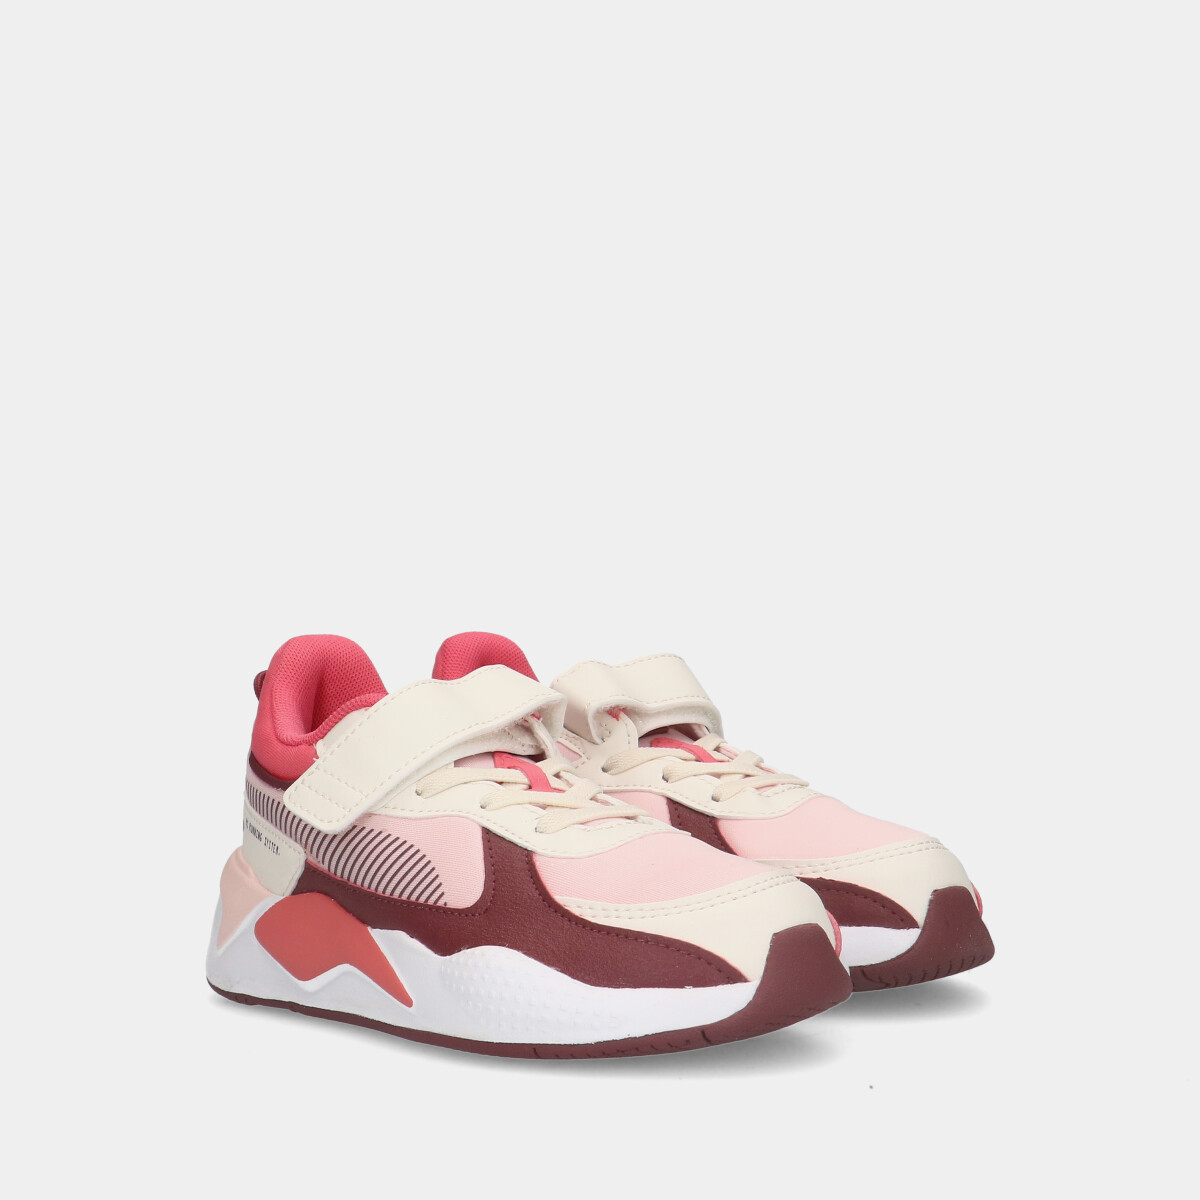 Puma RS-X Dreamy AC lightpink peuter sneakers